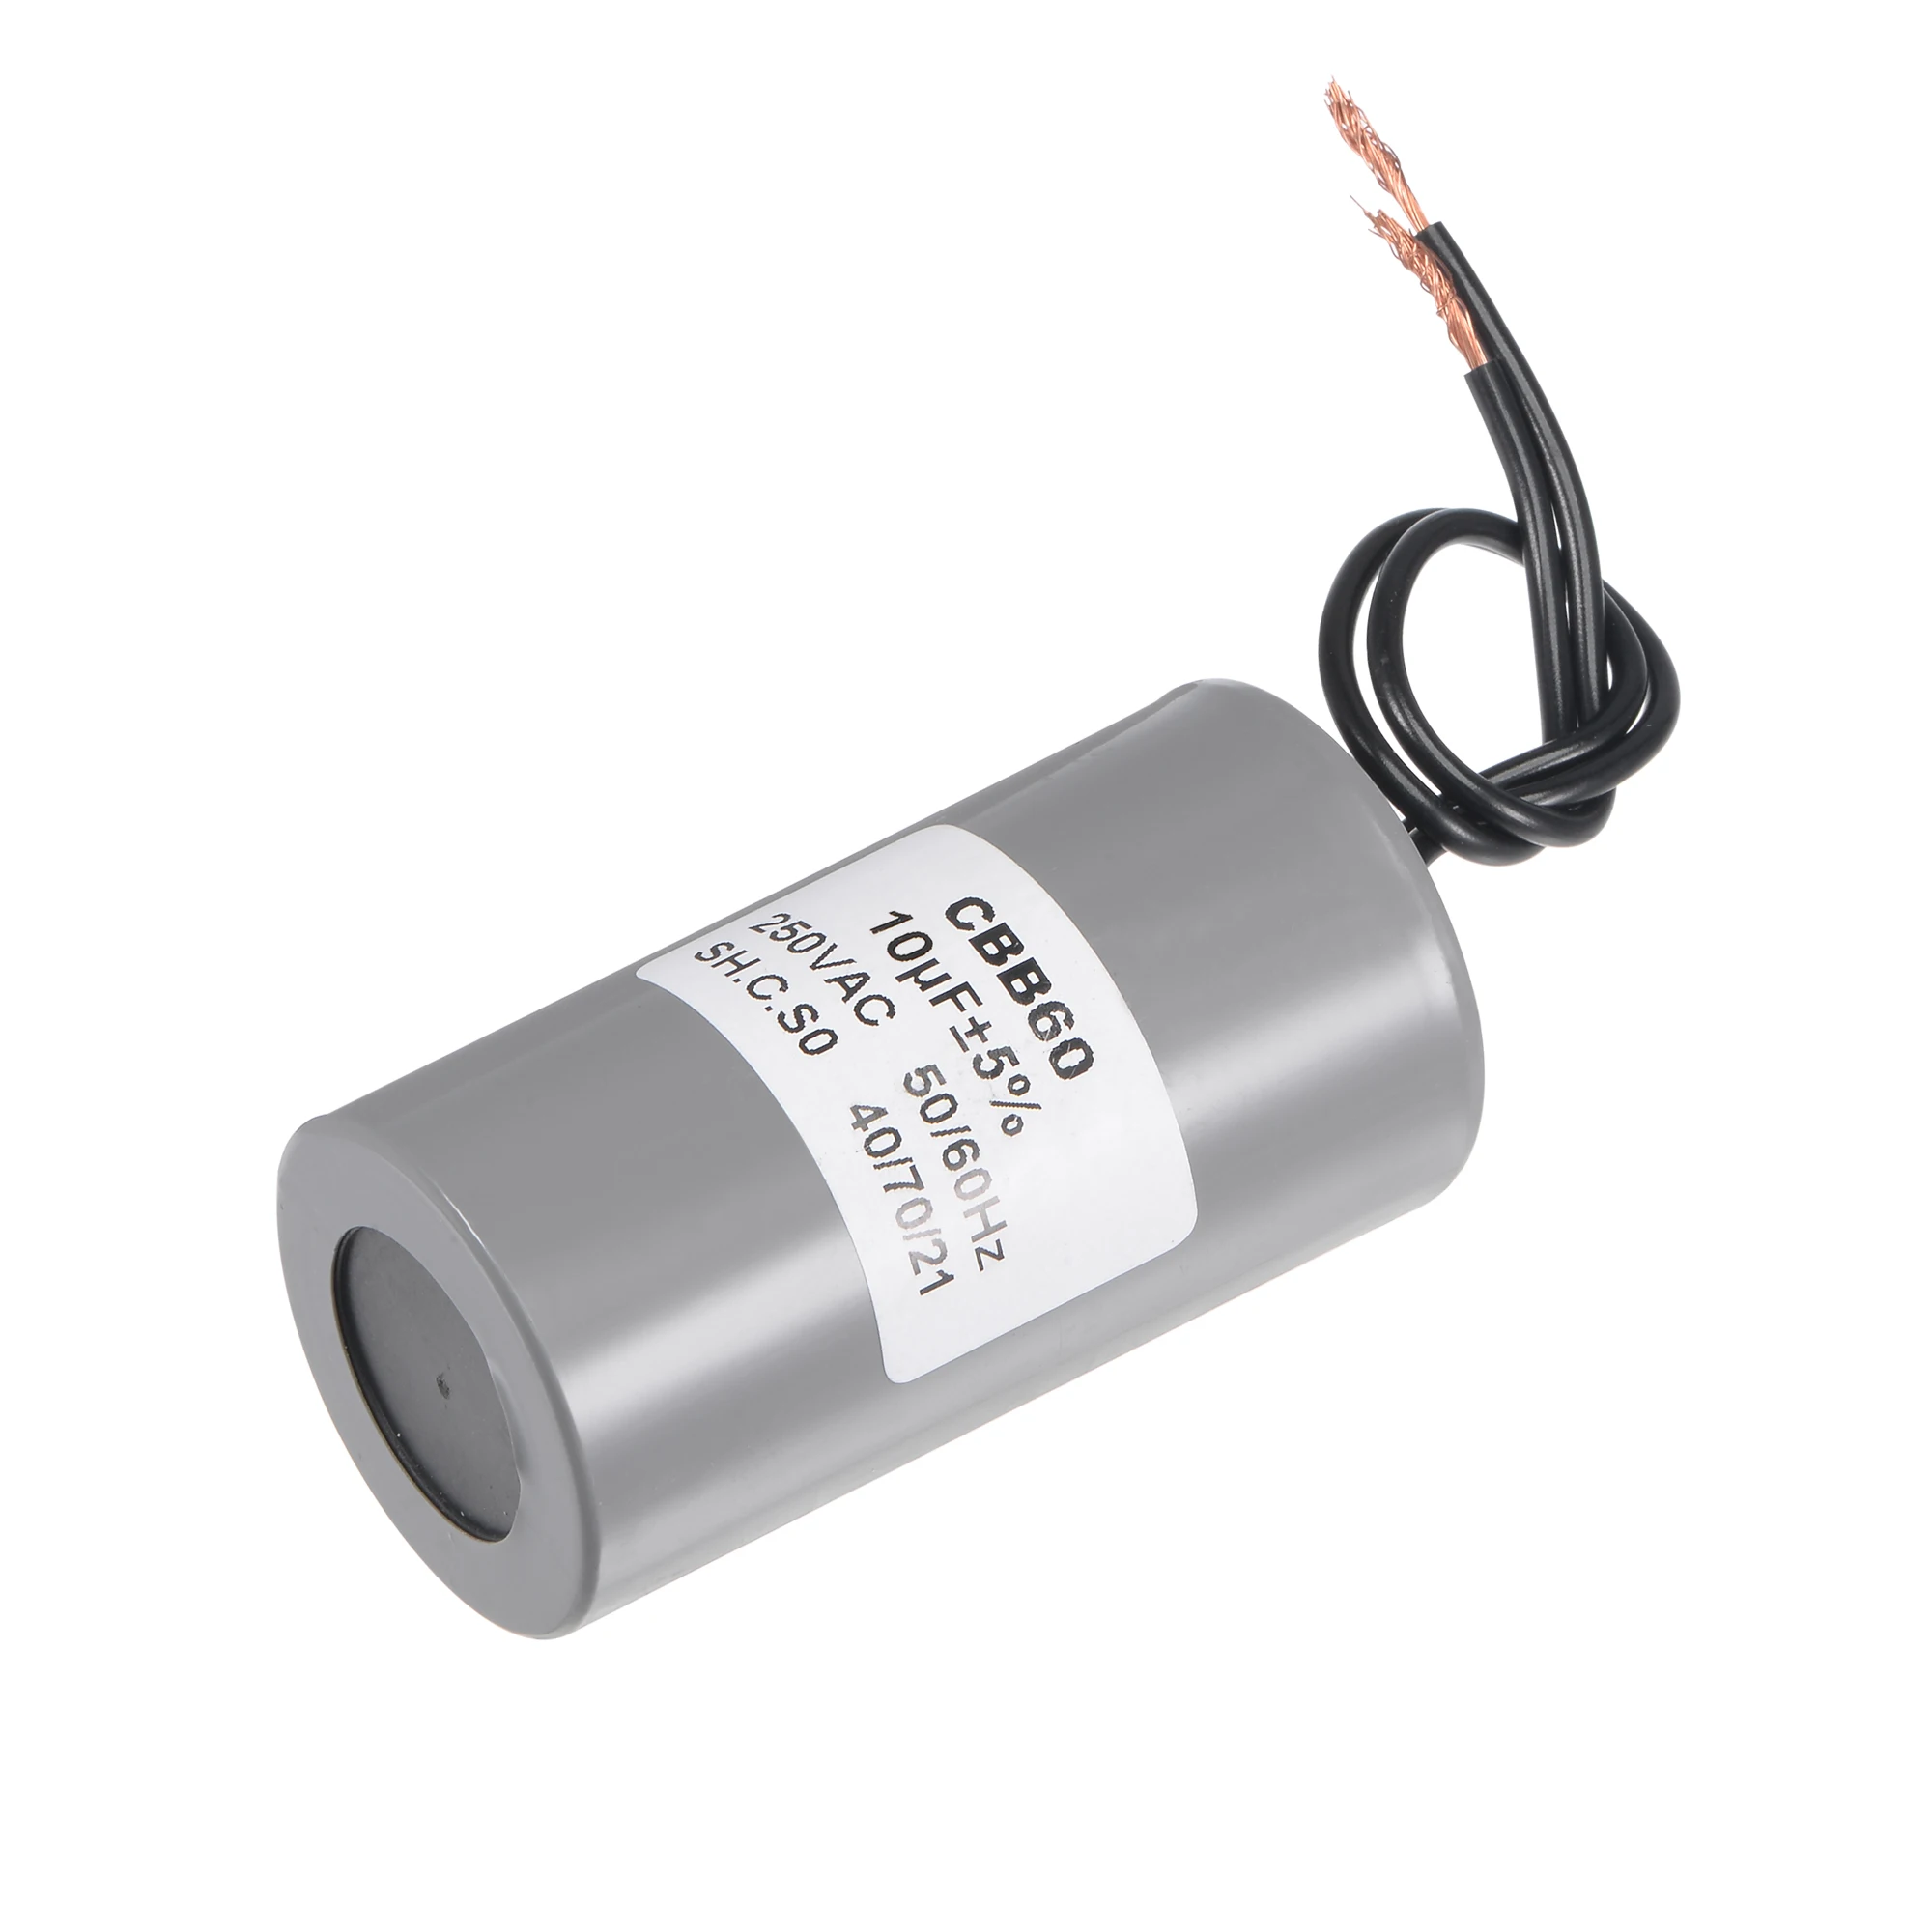 

1pcs 10uF CBB60 Motor Run Capacitor 250V AC 2 Wires 50/60Hz Cylinder 73x38mm for Air Compressor Water Pump Motor